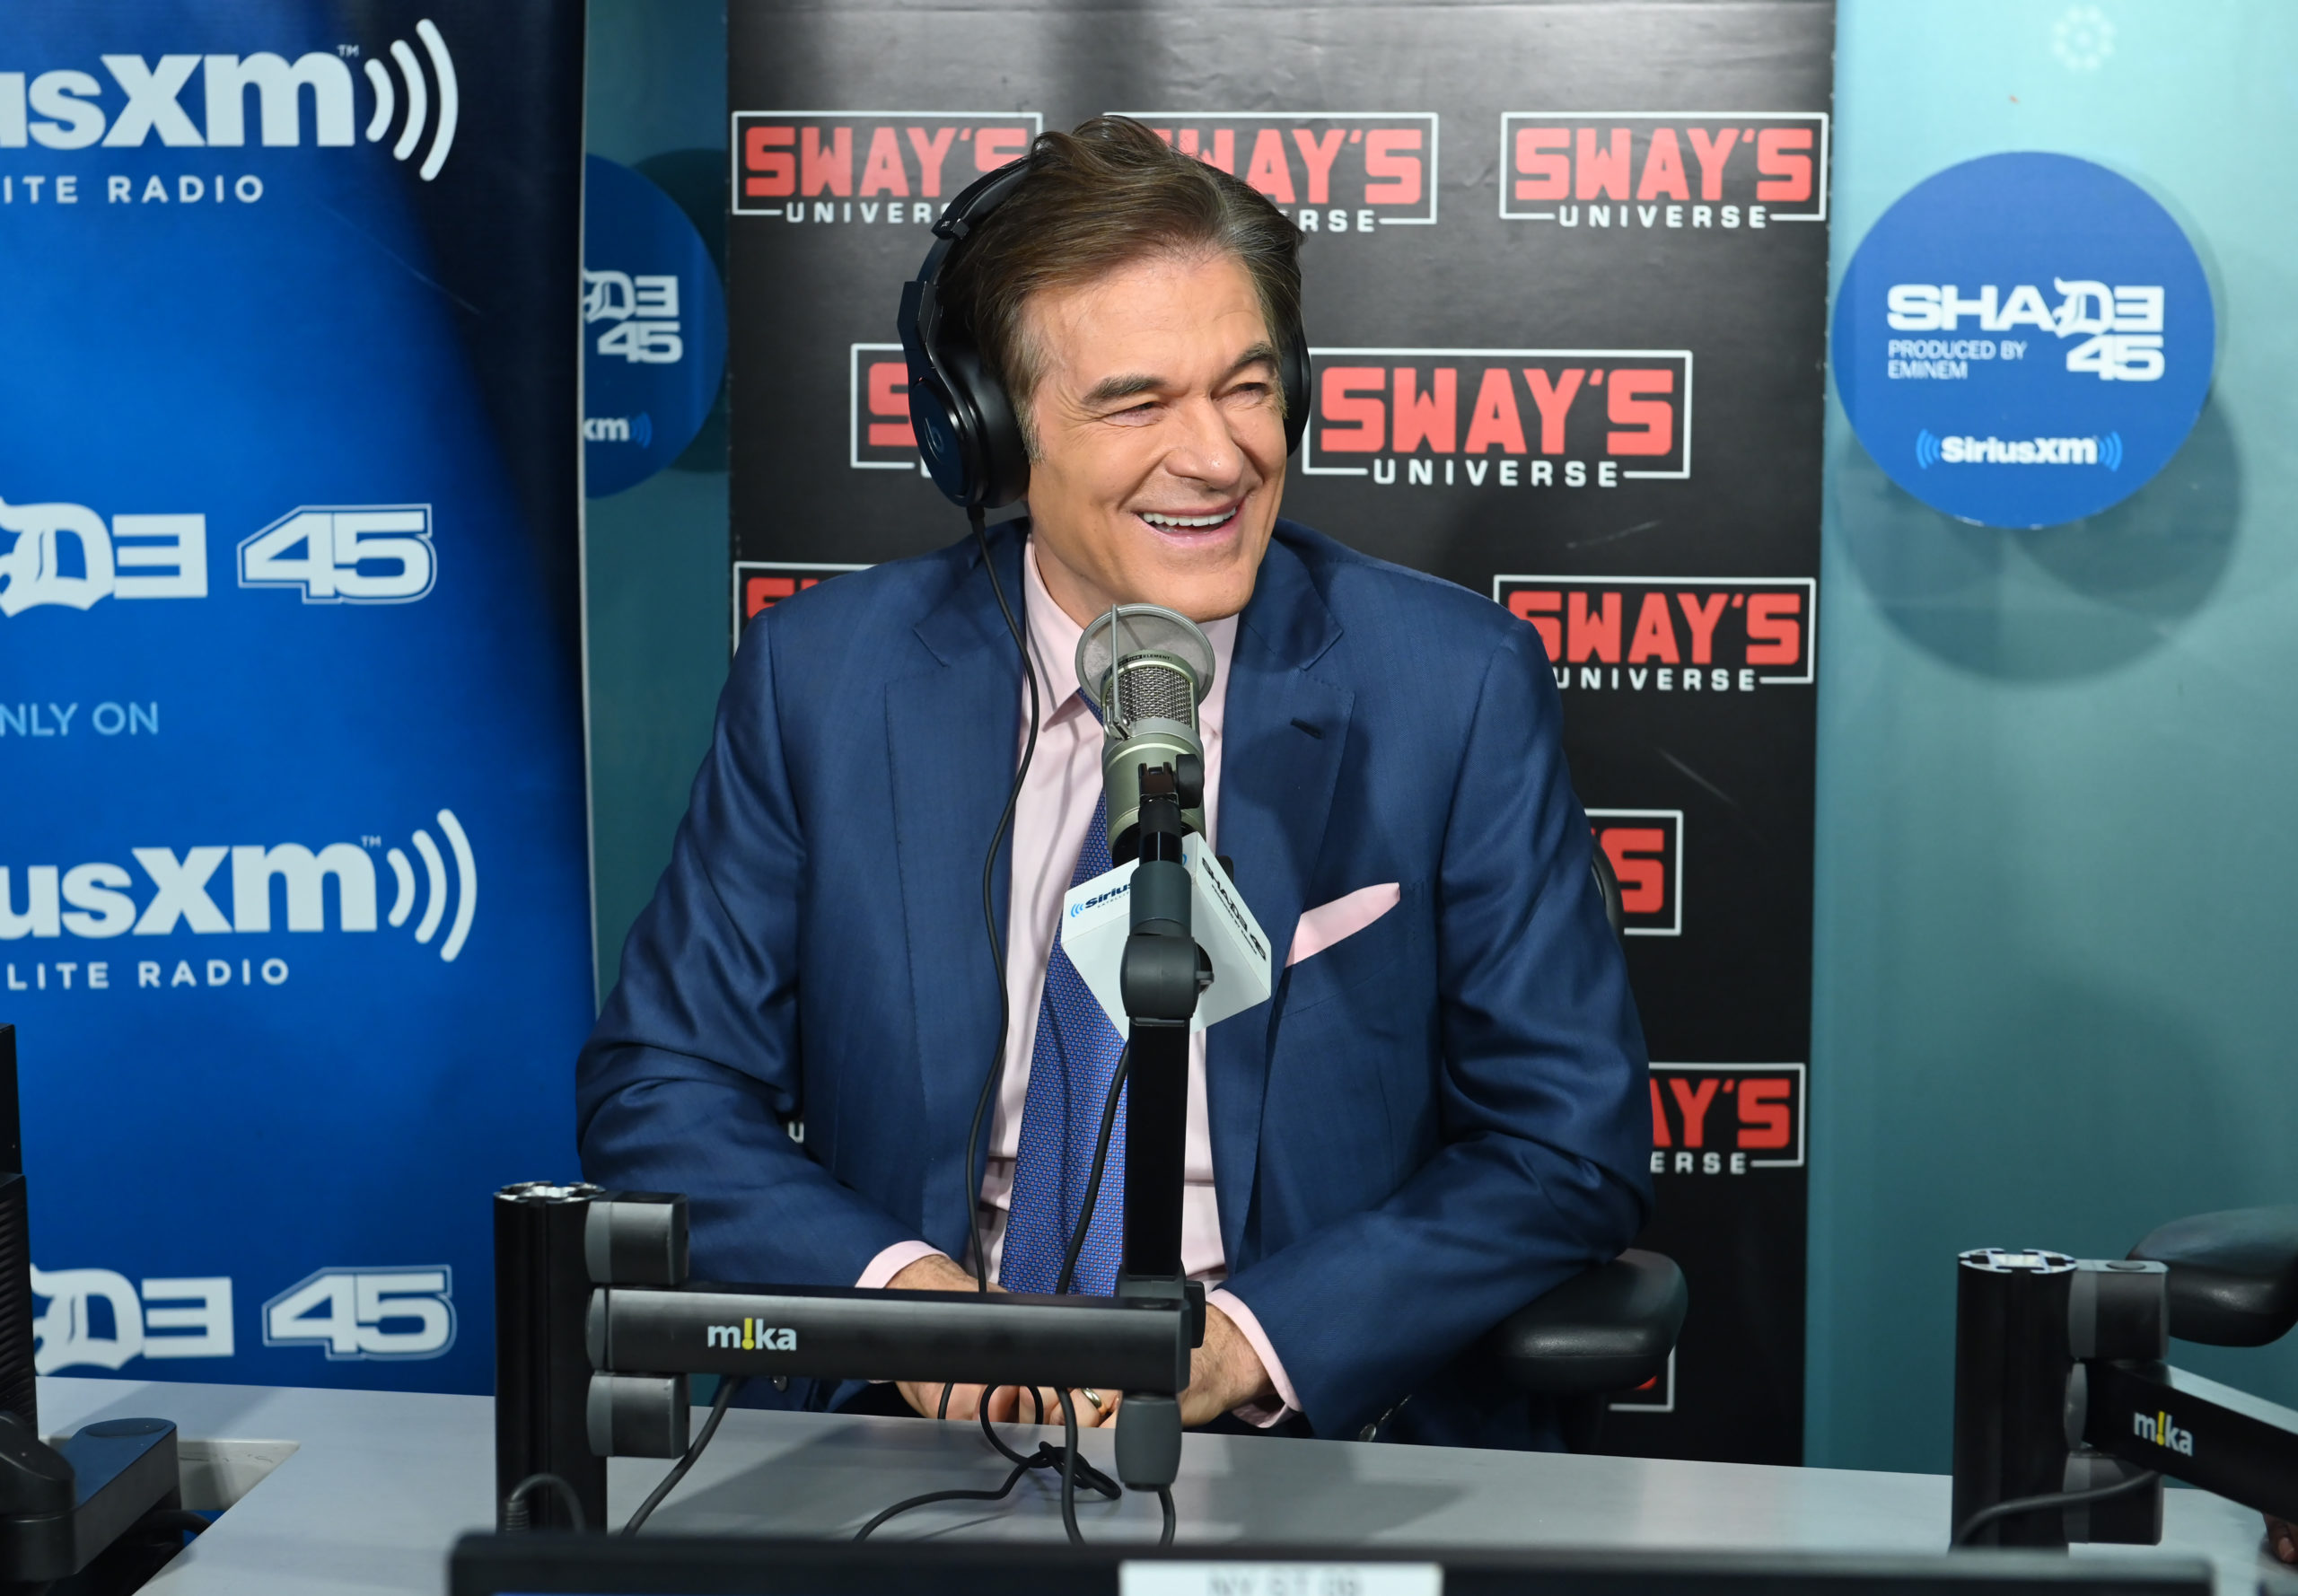 NEW YORK, NEW YORK - JANUARY 27: (EXCLUSIVE COVERAGE) Dr. Oz visits 'Sway in the Morning' with Sway Calloway on Eminem's Shade 45 at the SiriusXM Studios on January 27, 2020 in New York City. (Photo by Noam Galai/Getty Images)